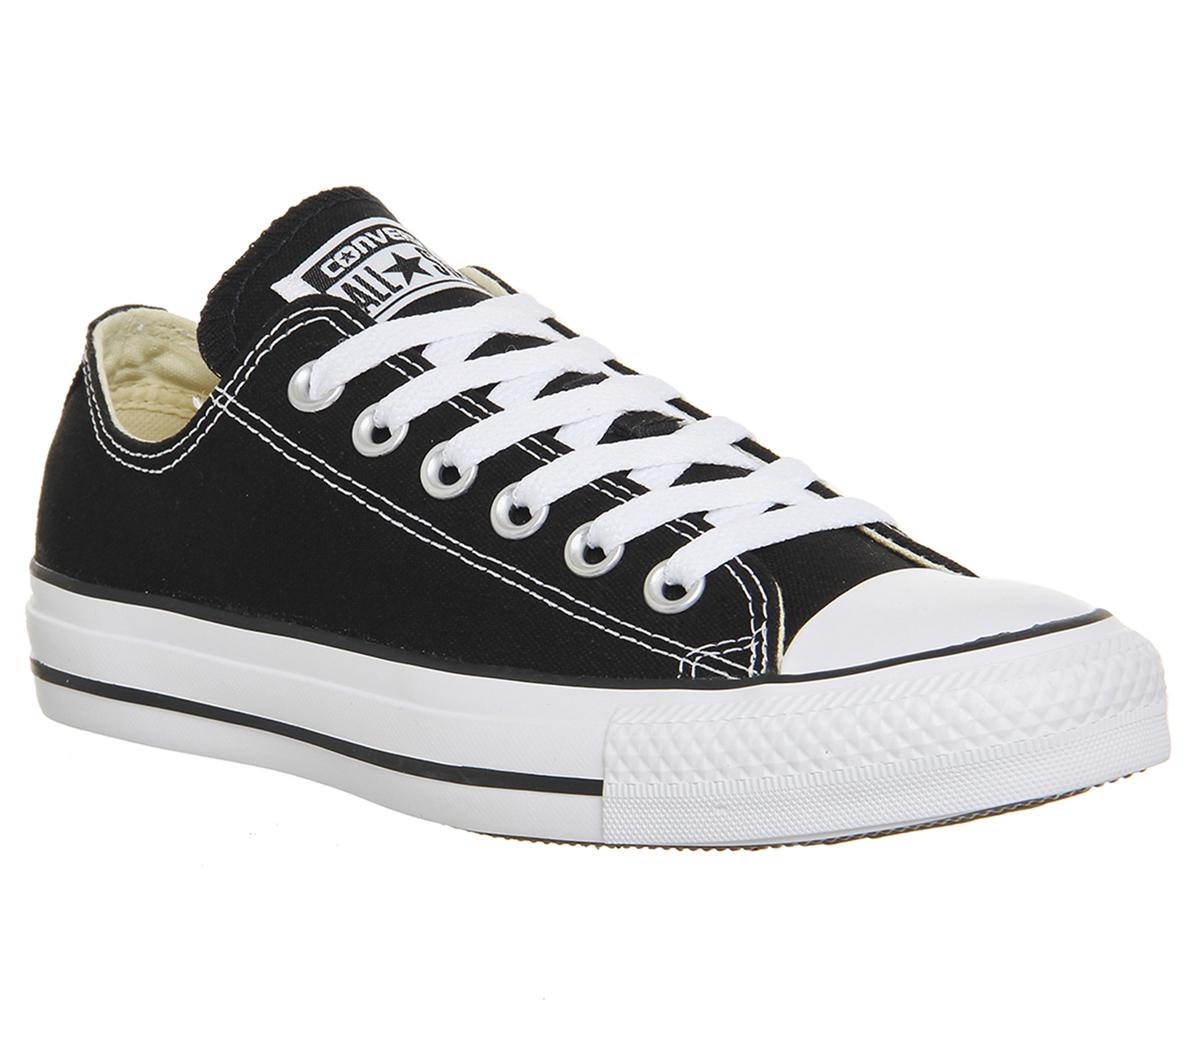 Converse All Star Low Black Canvas - Unisex Sports